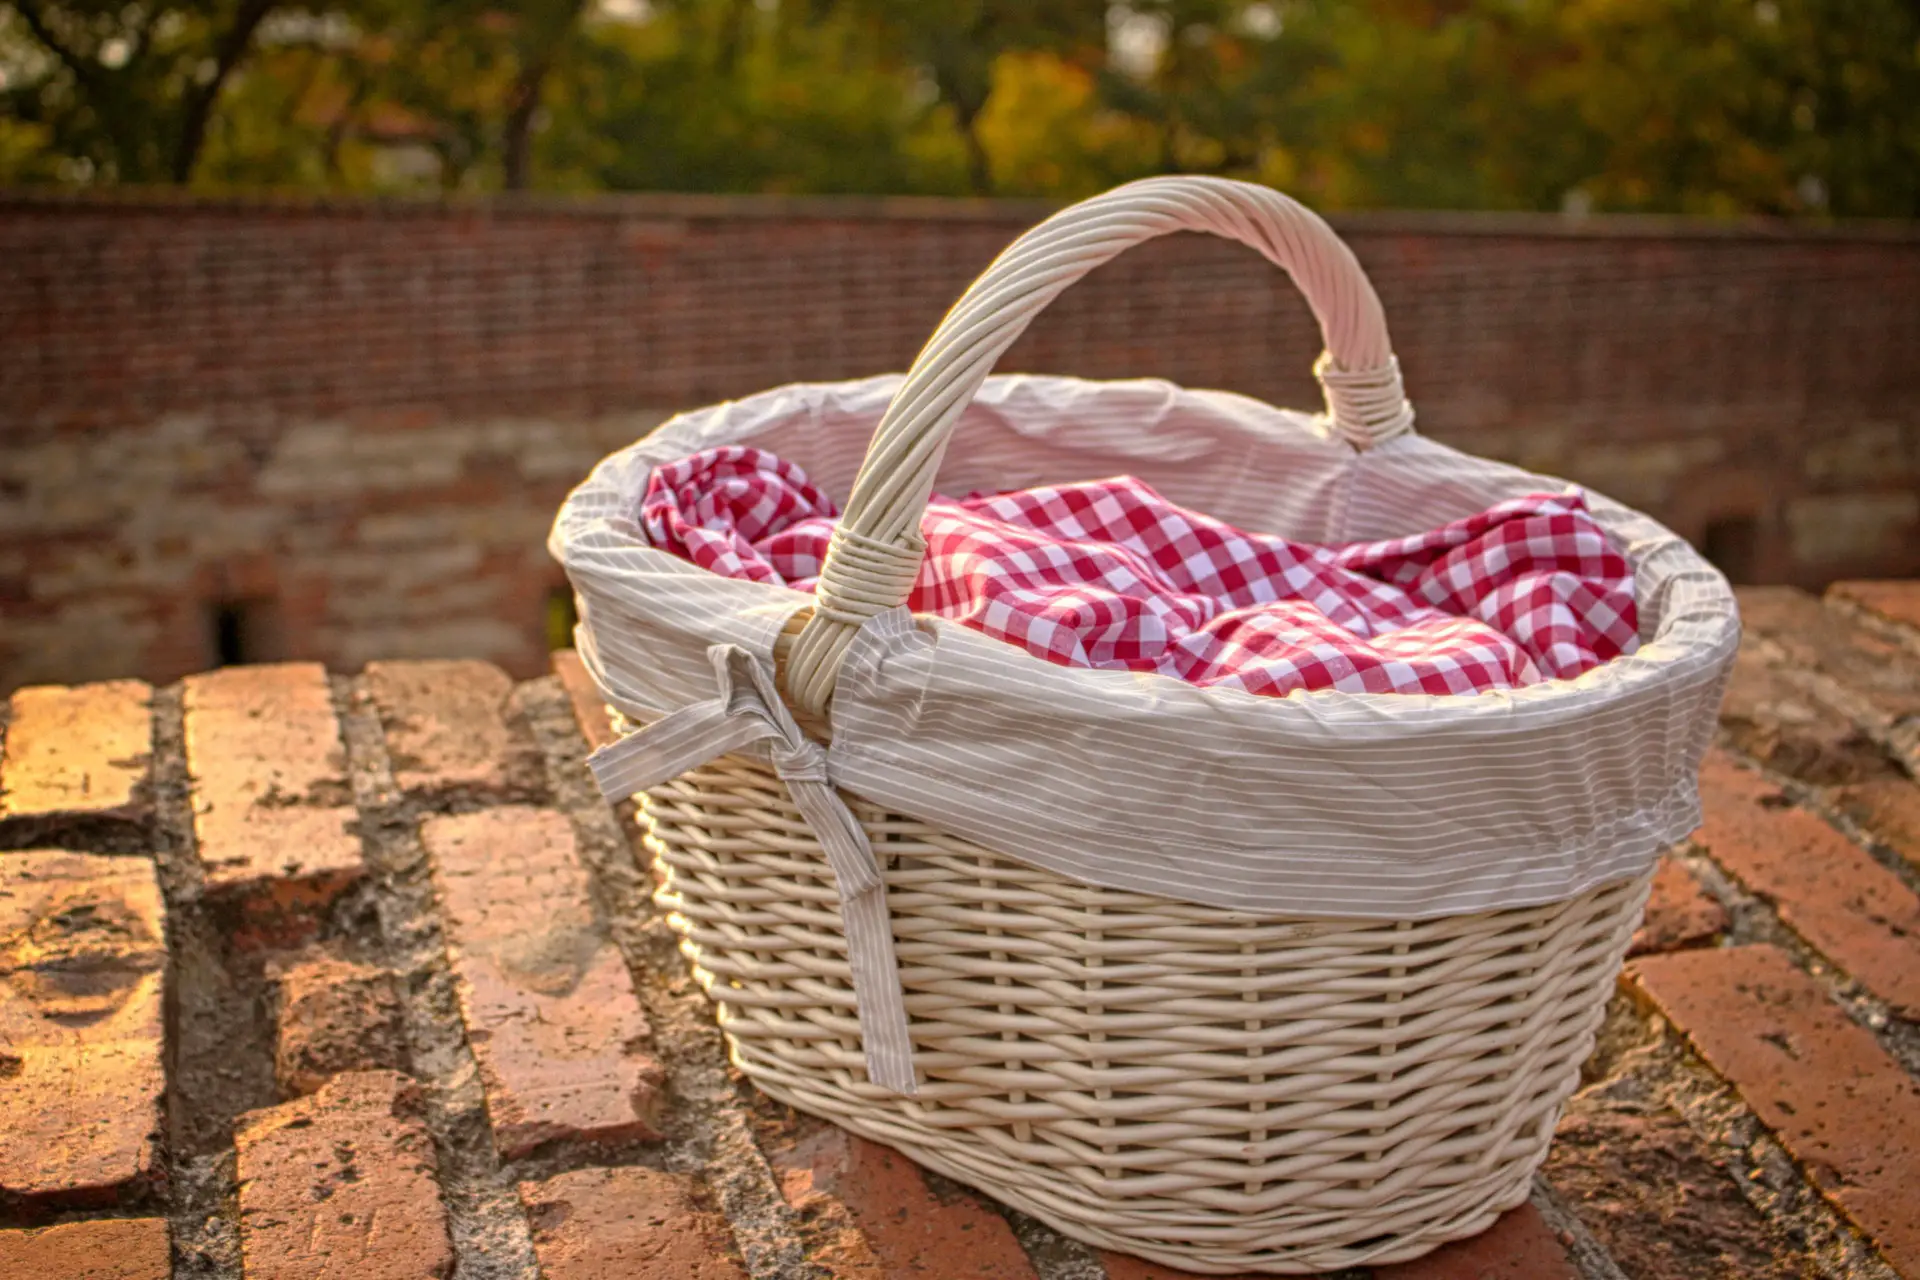 An in-depth review of the best picnic baskets available in 2018.